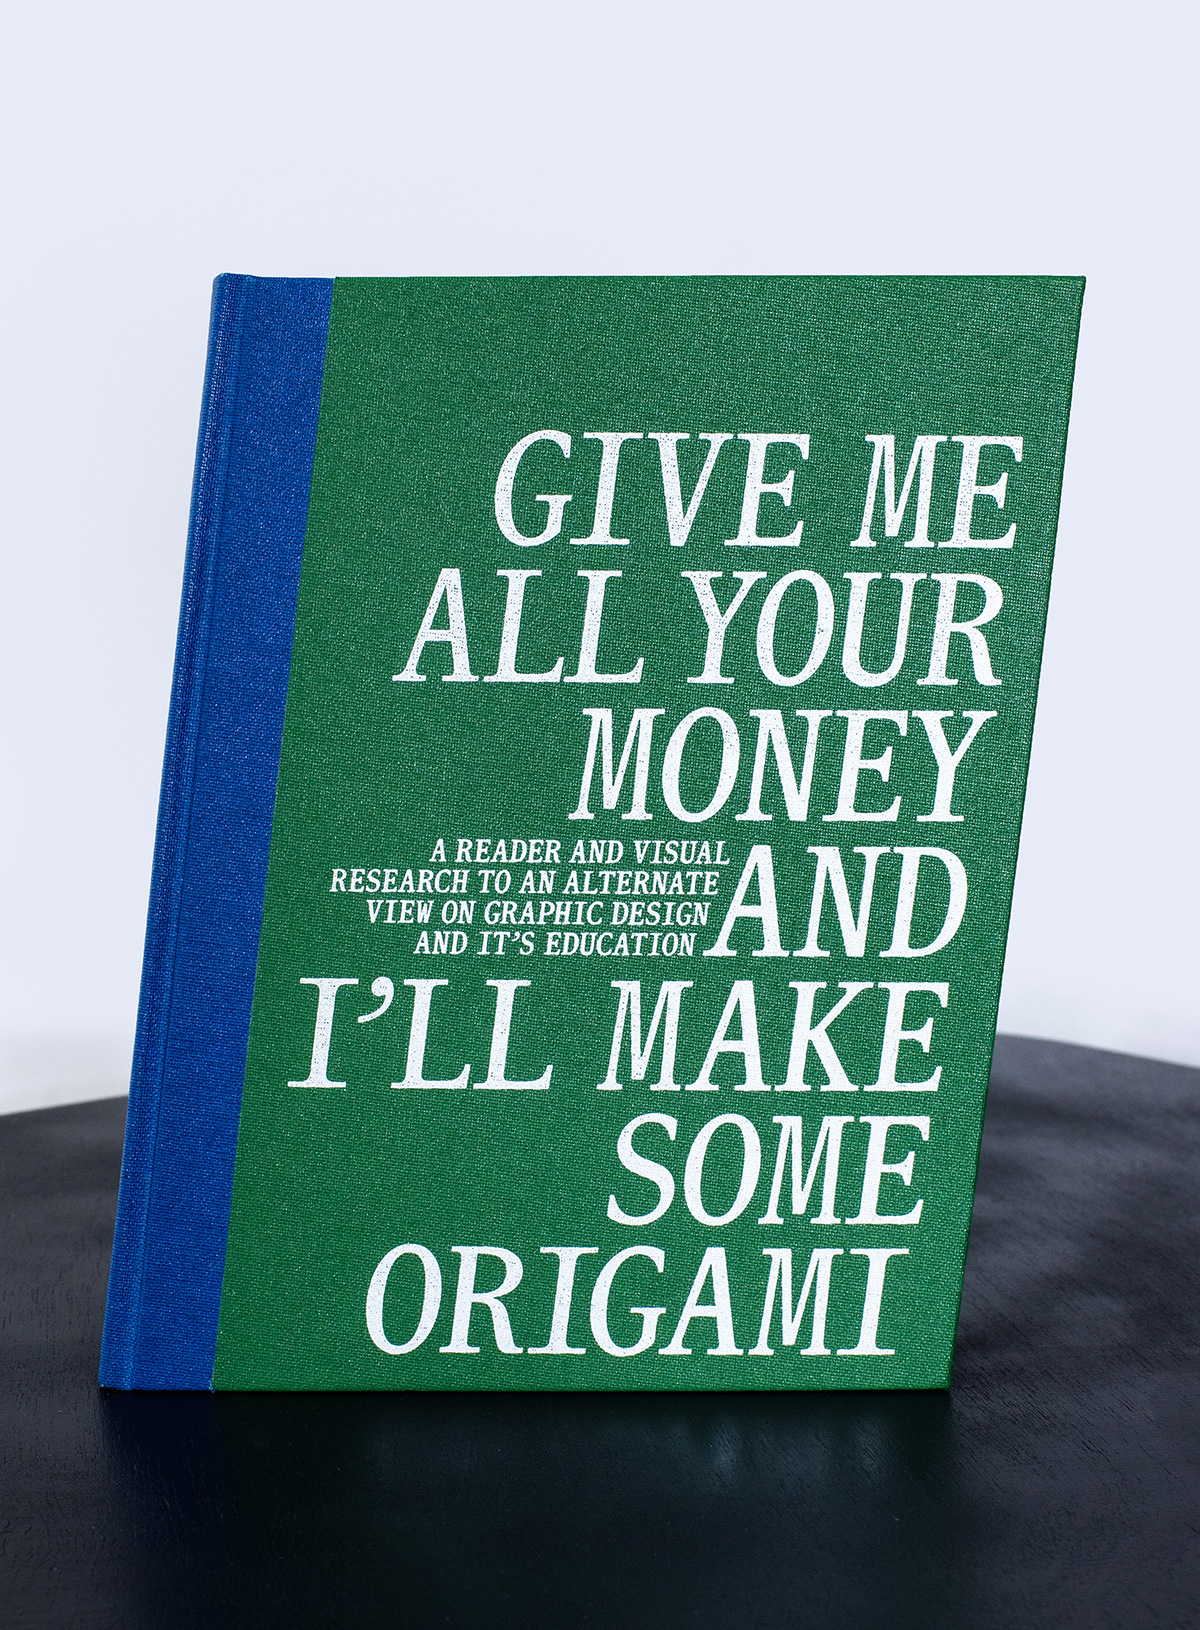 Give me all your money and I’ll make some origami